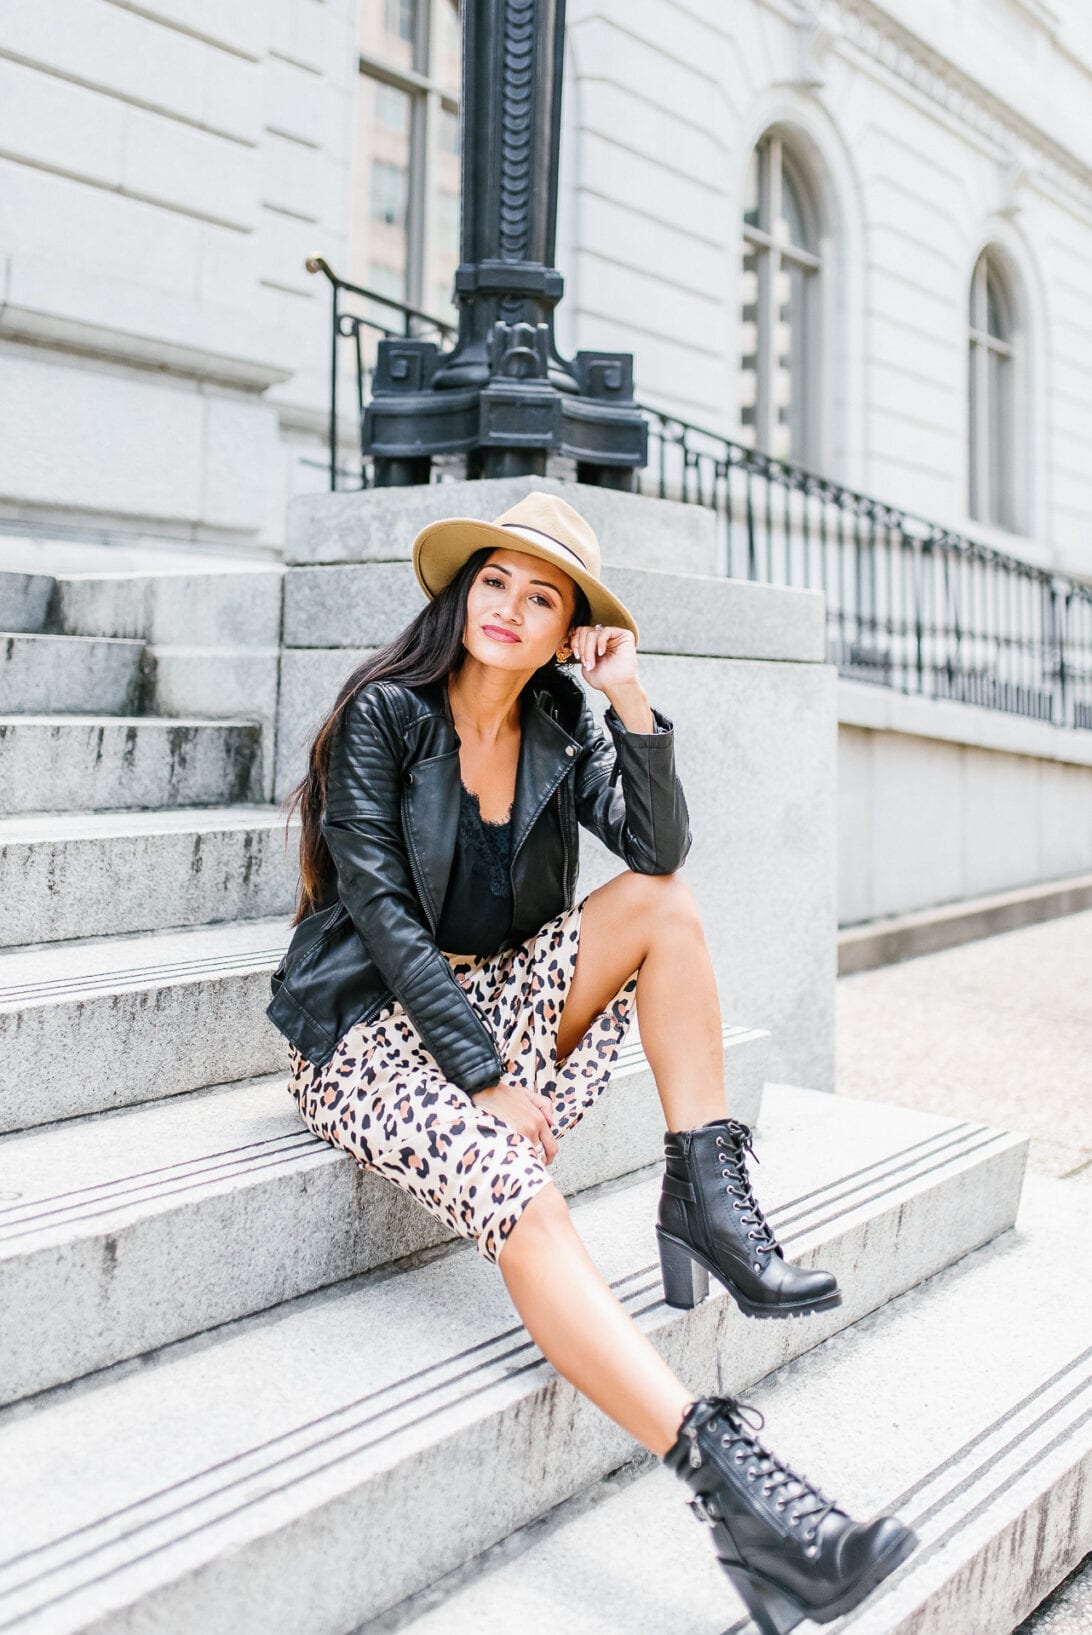 LACE UP BOOTS, FAUX LEATHER JACKET, FEDORA, HOW TO STYLE LEOPARD SKIRT